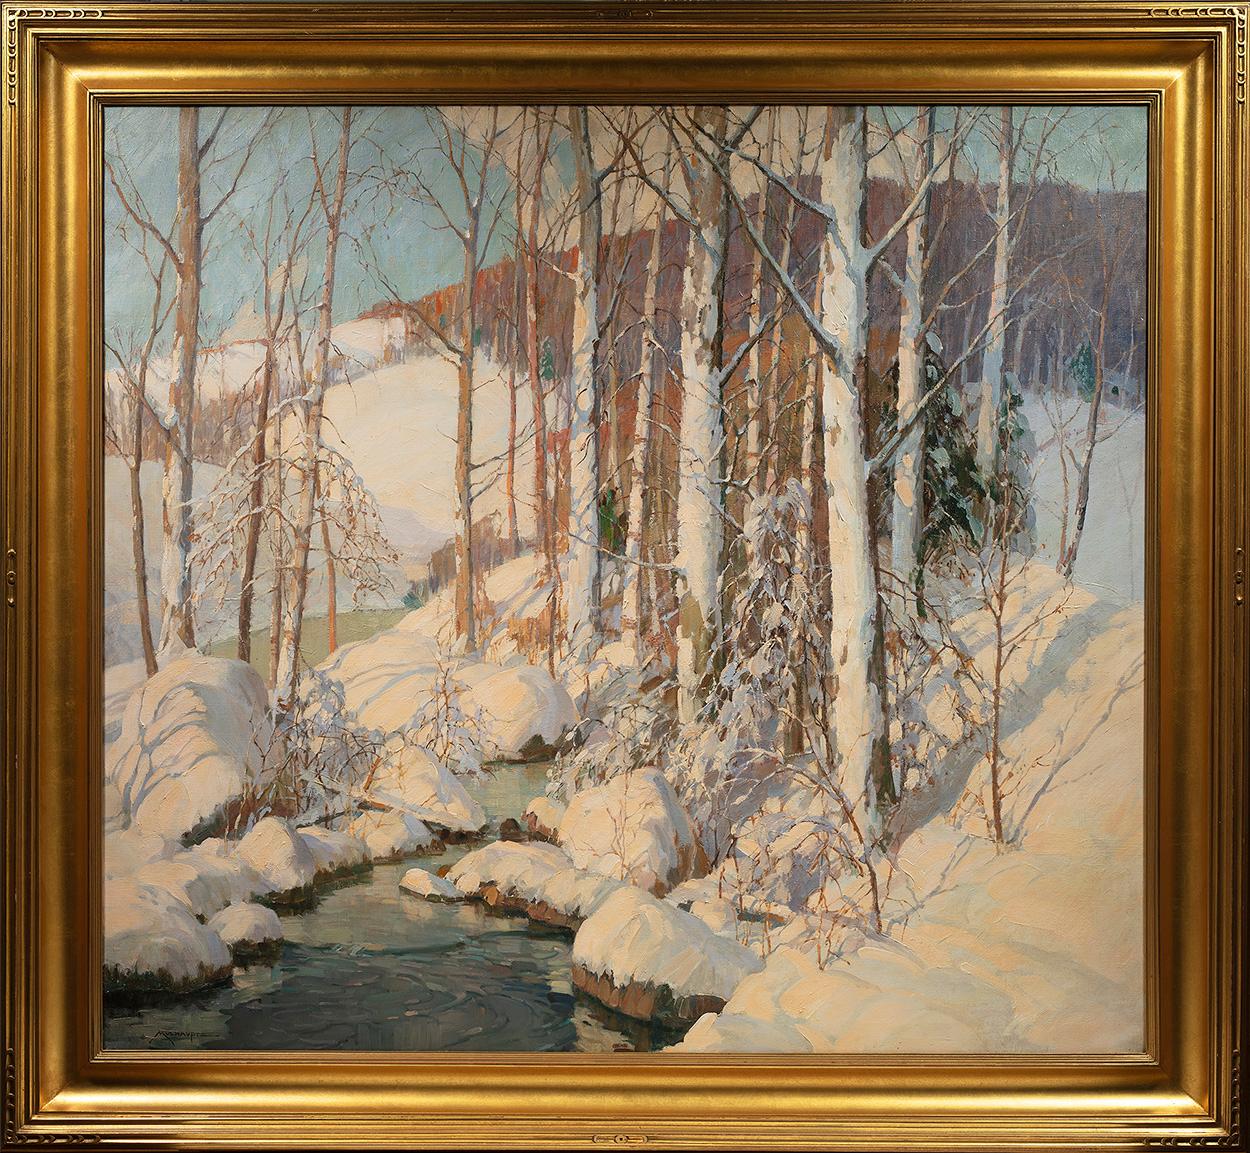 Winter Calm - Painting by Frederick J. Mulhaupt